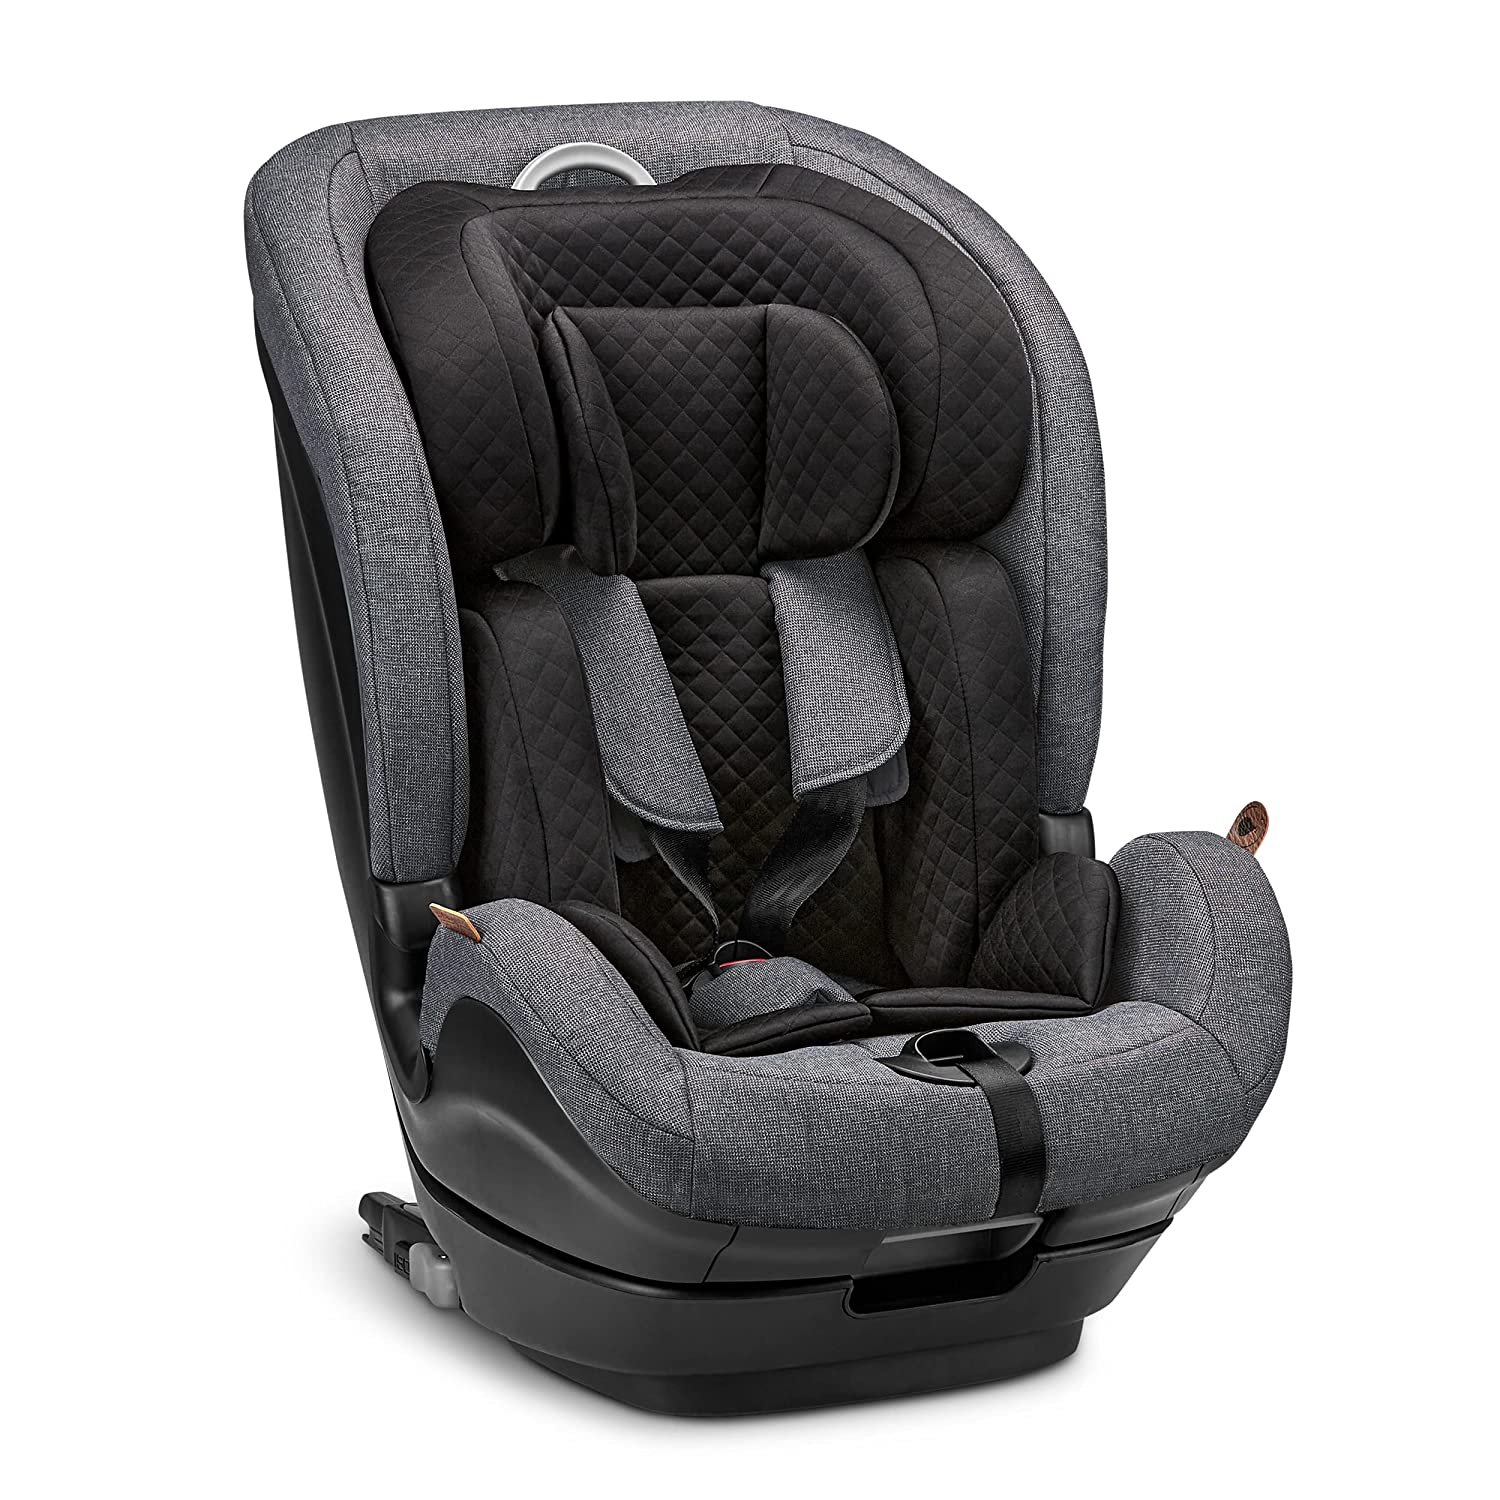 ABC Design Aspen i-Size Diamond Edition Child Car Seat for Children with 76-150 cm (from 15 months to 12 years) Isofix Attachment Secure Side Impact Protection Colour: Asphalt